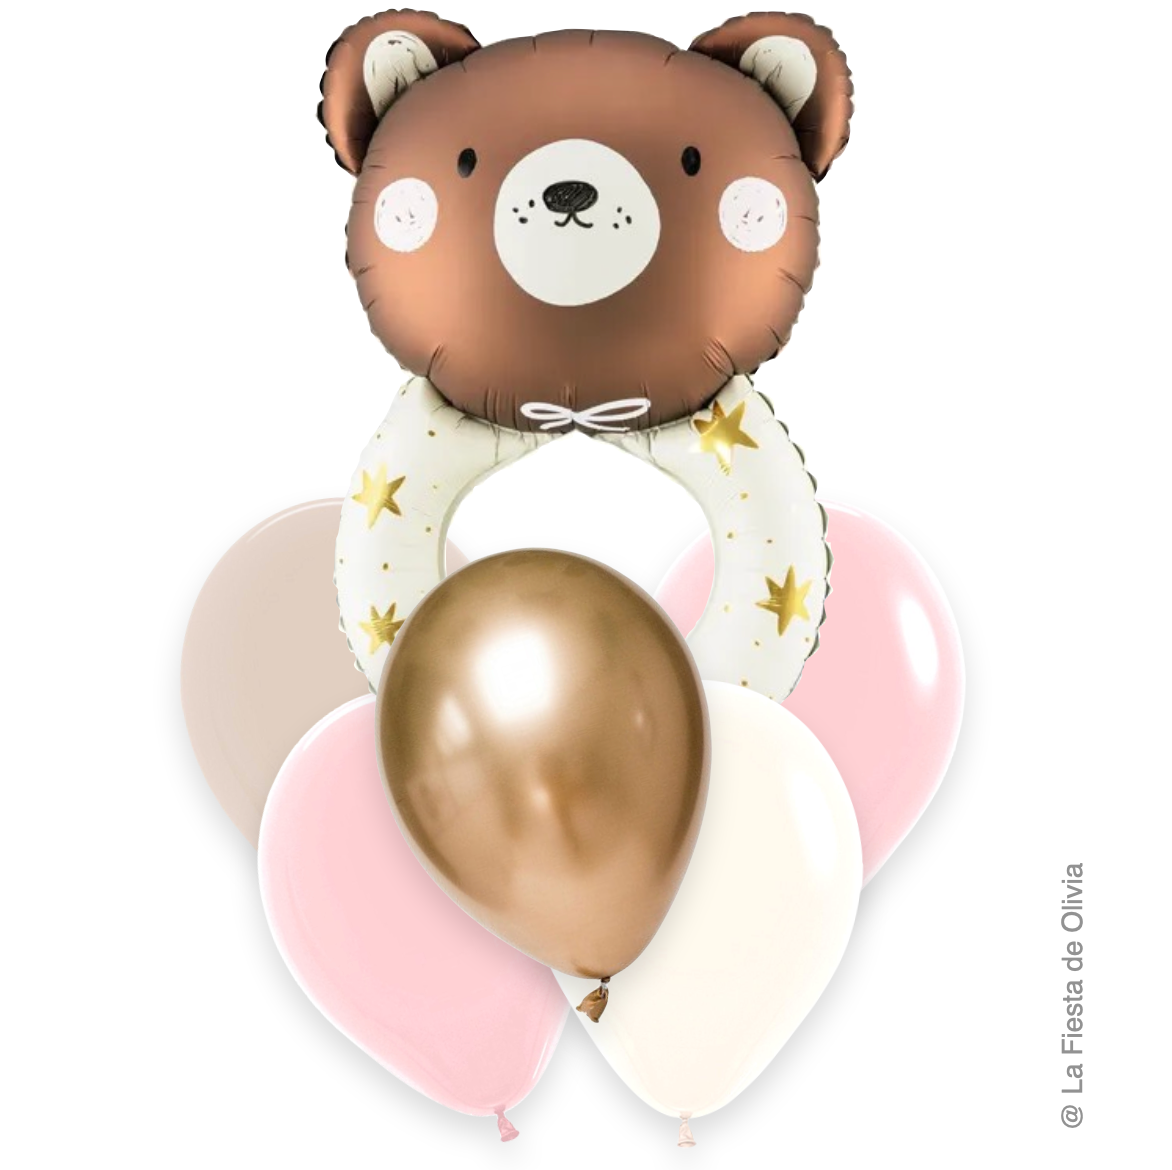 Bouquet Baby BEAR inflated with helium